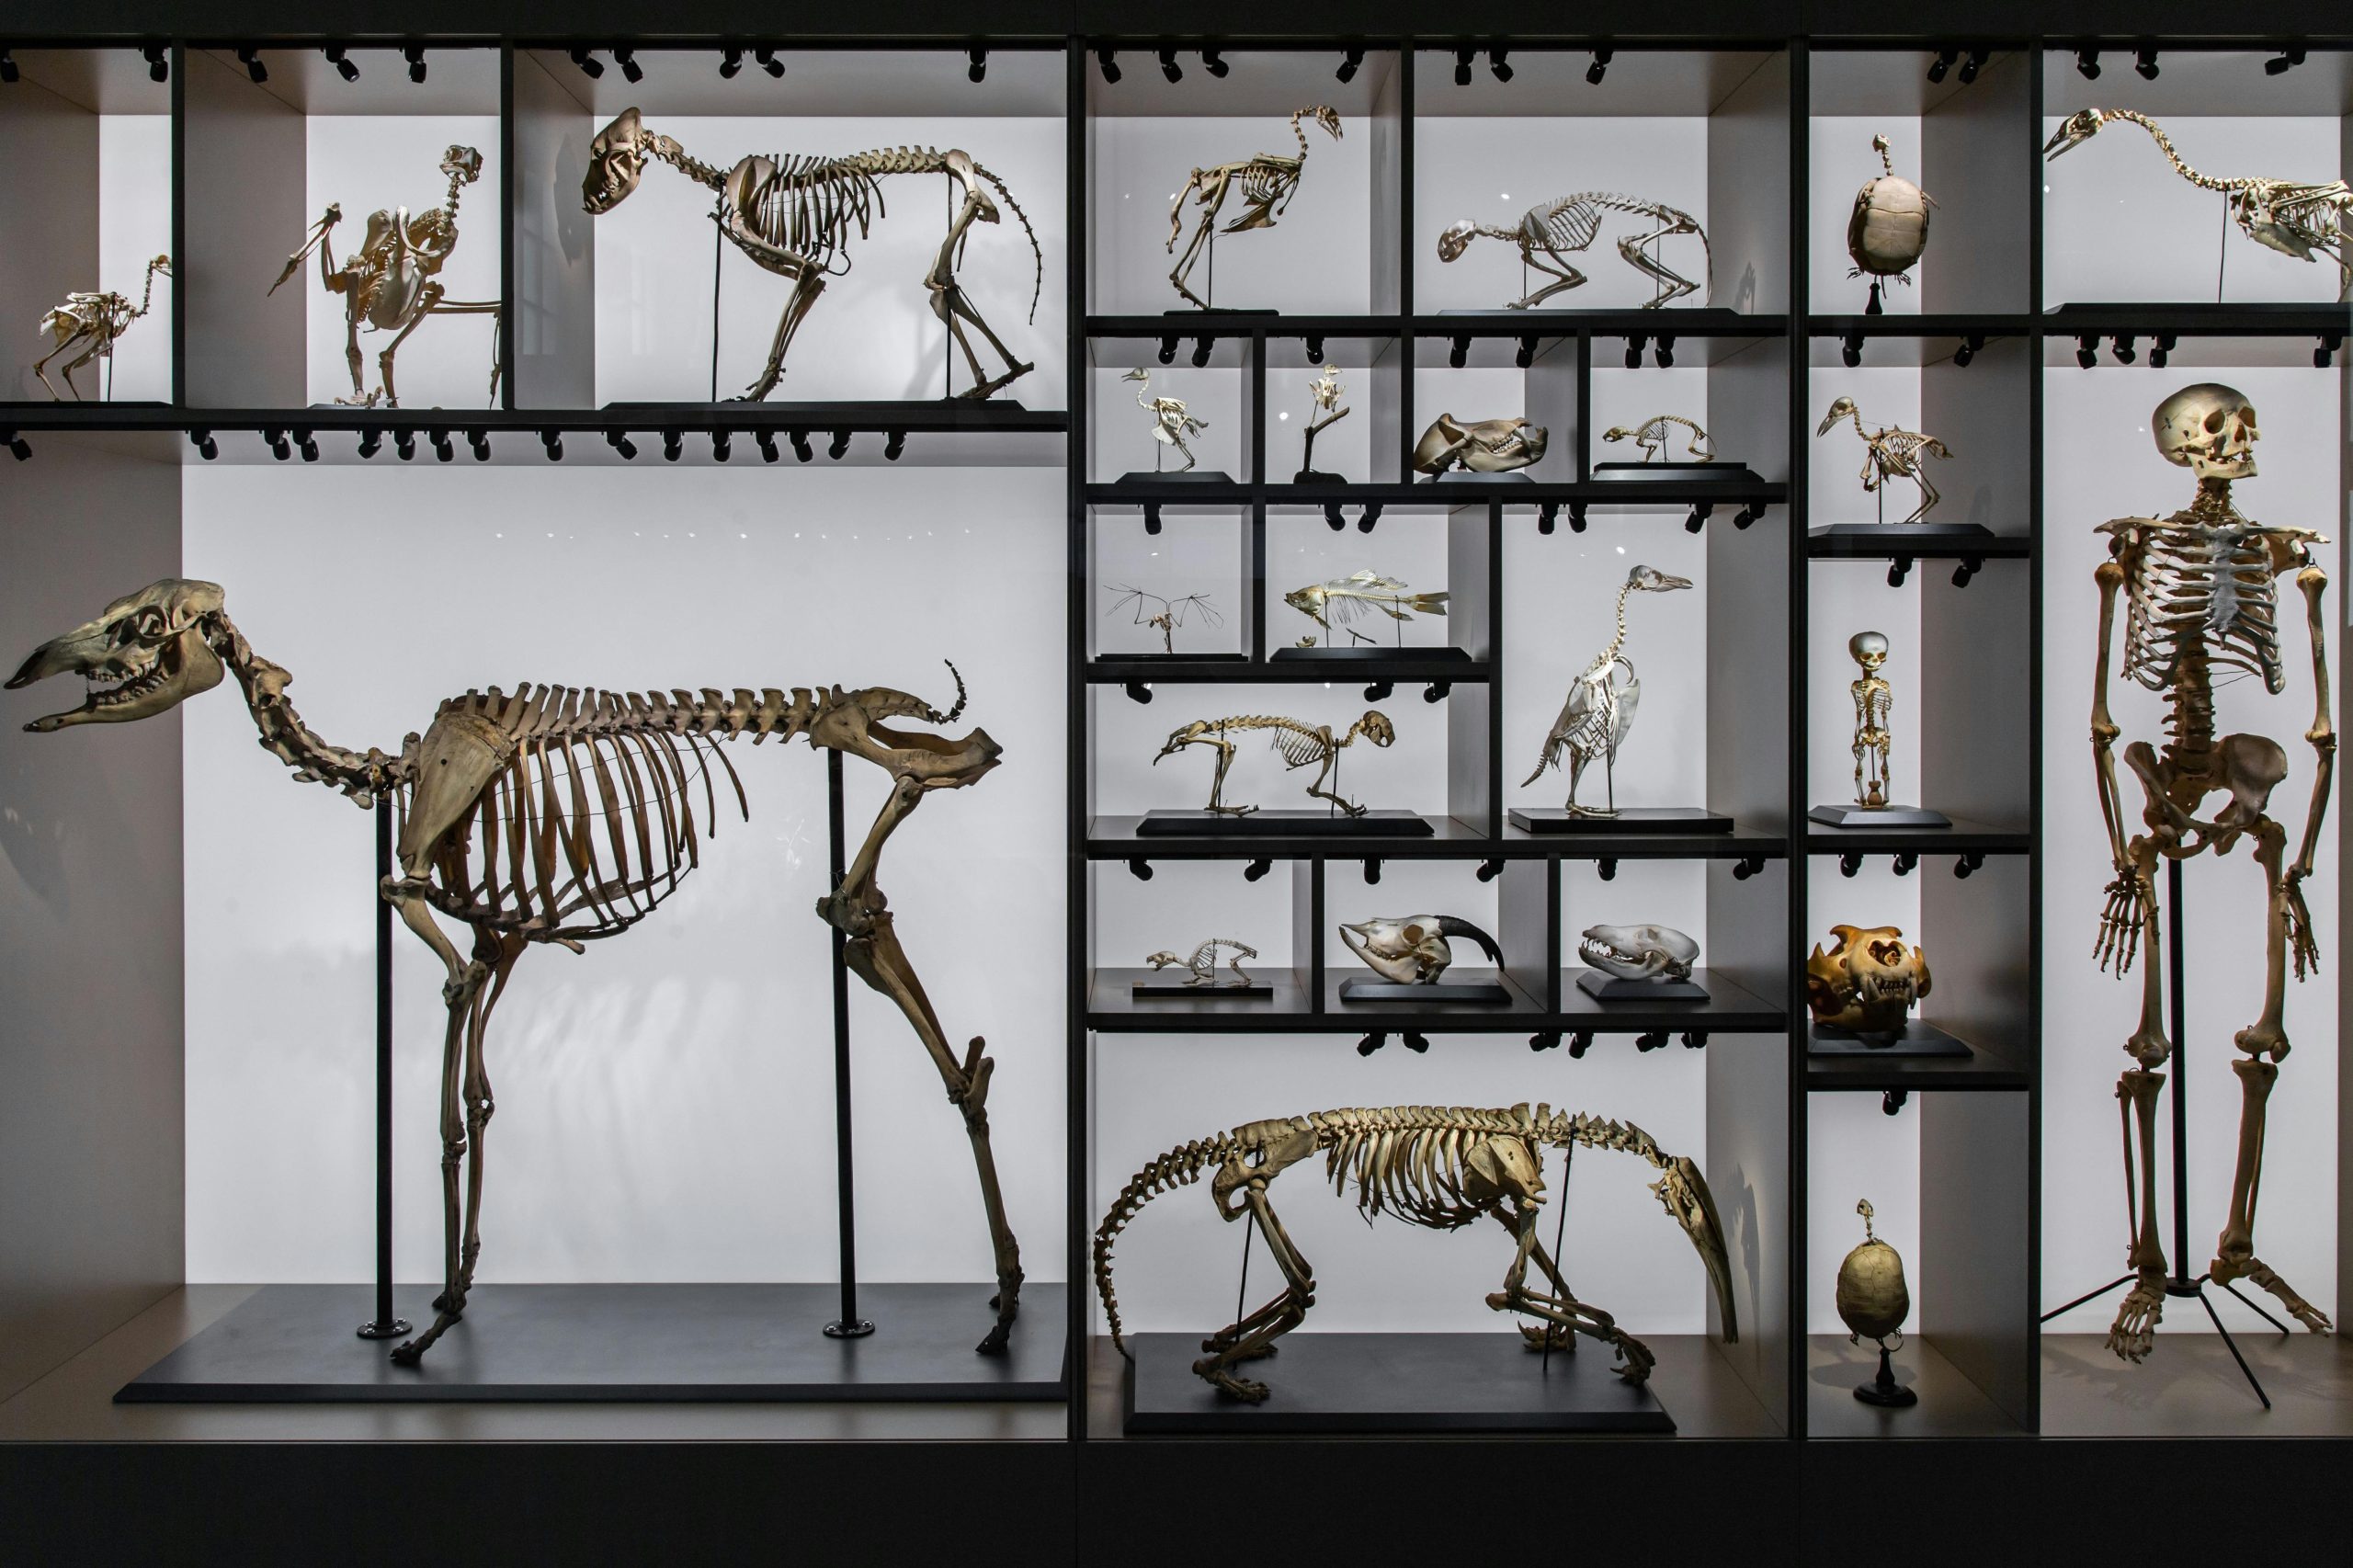 A display of skeletons, mostly animal, with one human skeleton on the far right. Other animals include a horse, goat, cat, various birds, and others.